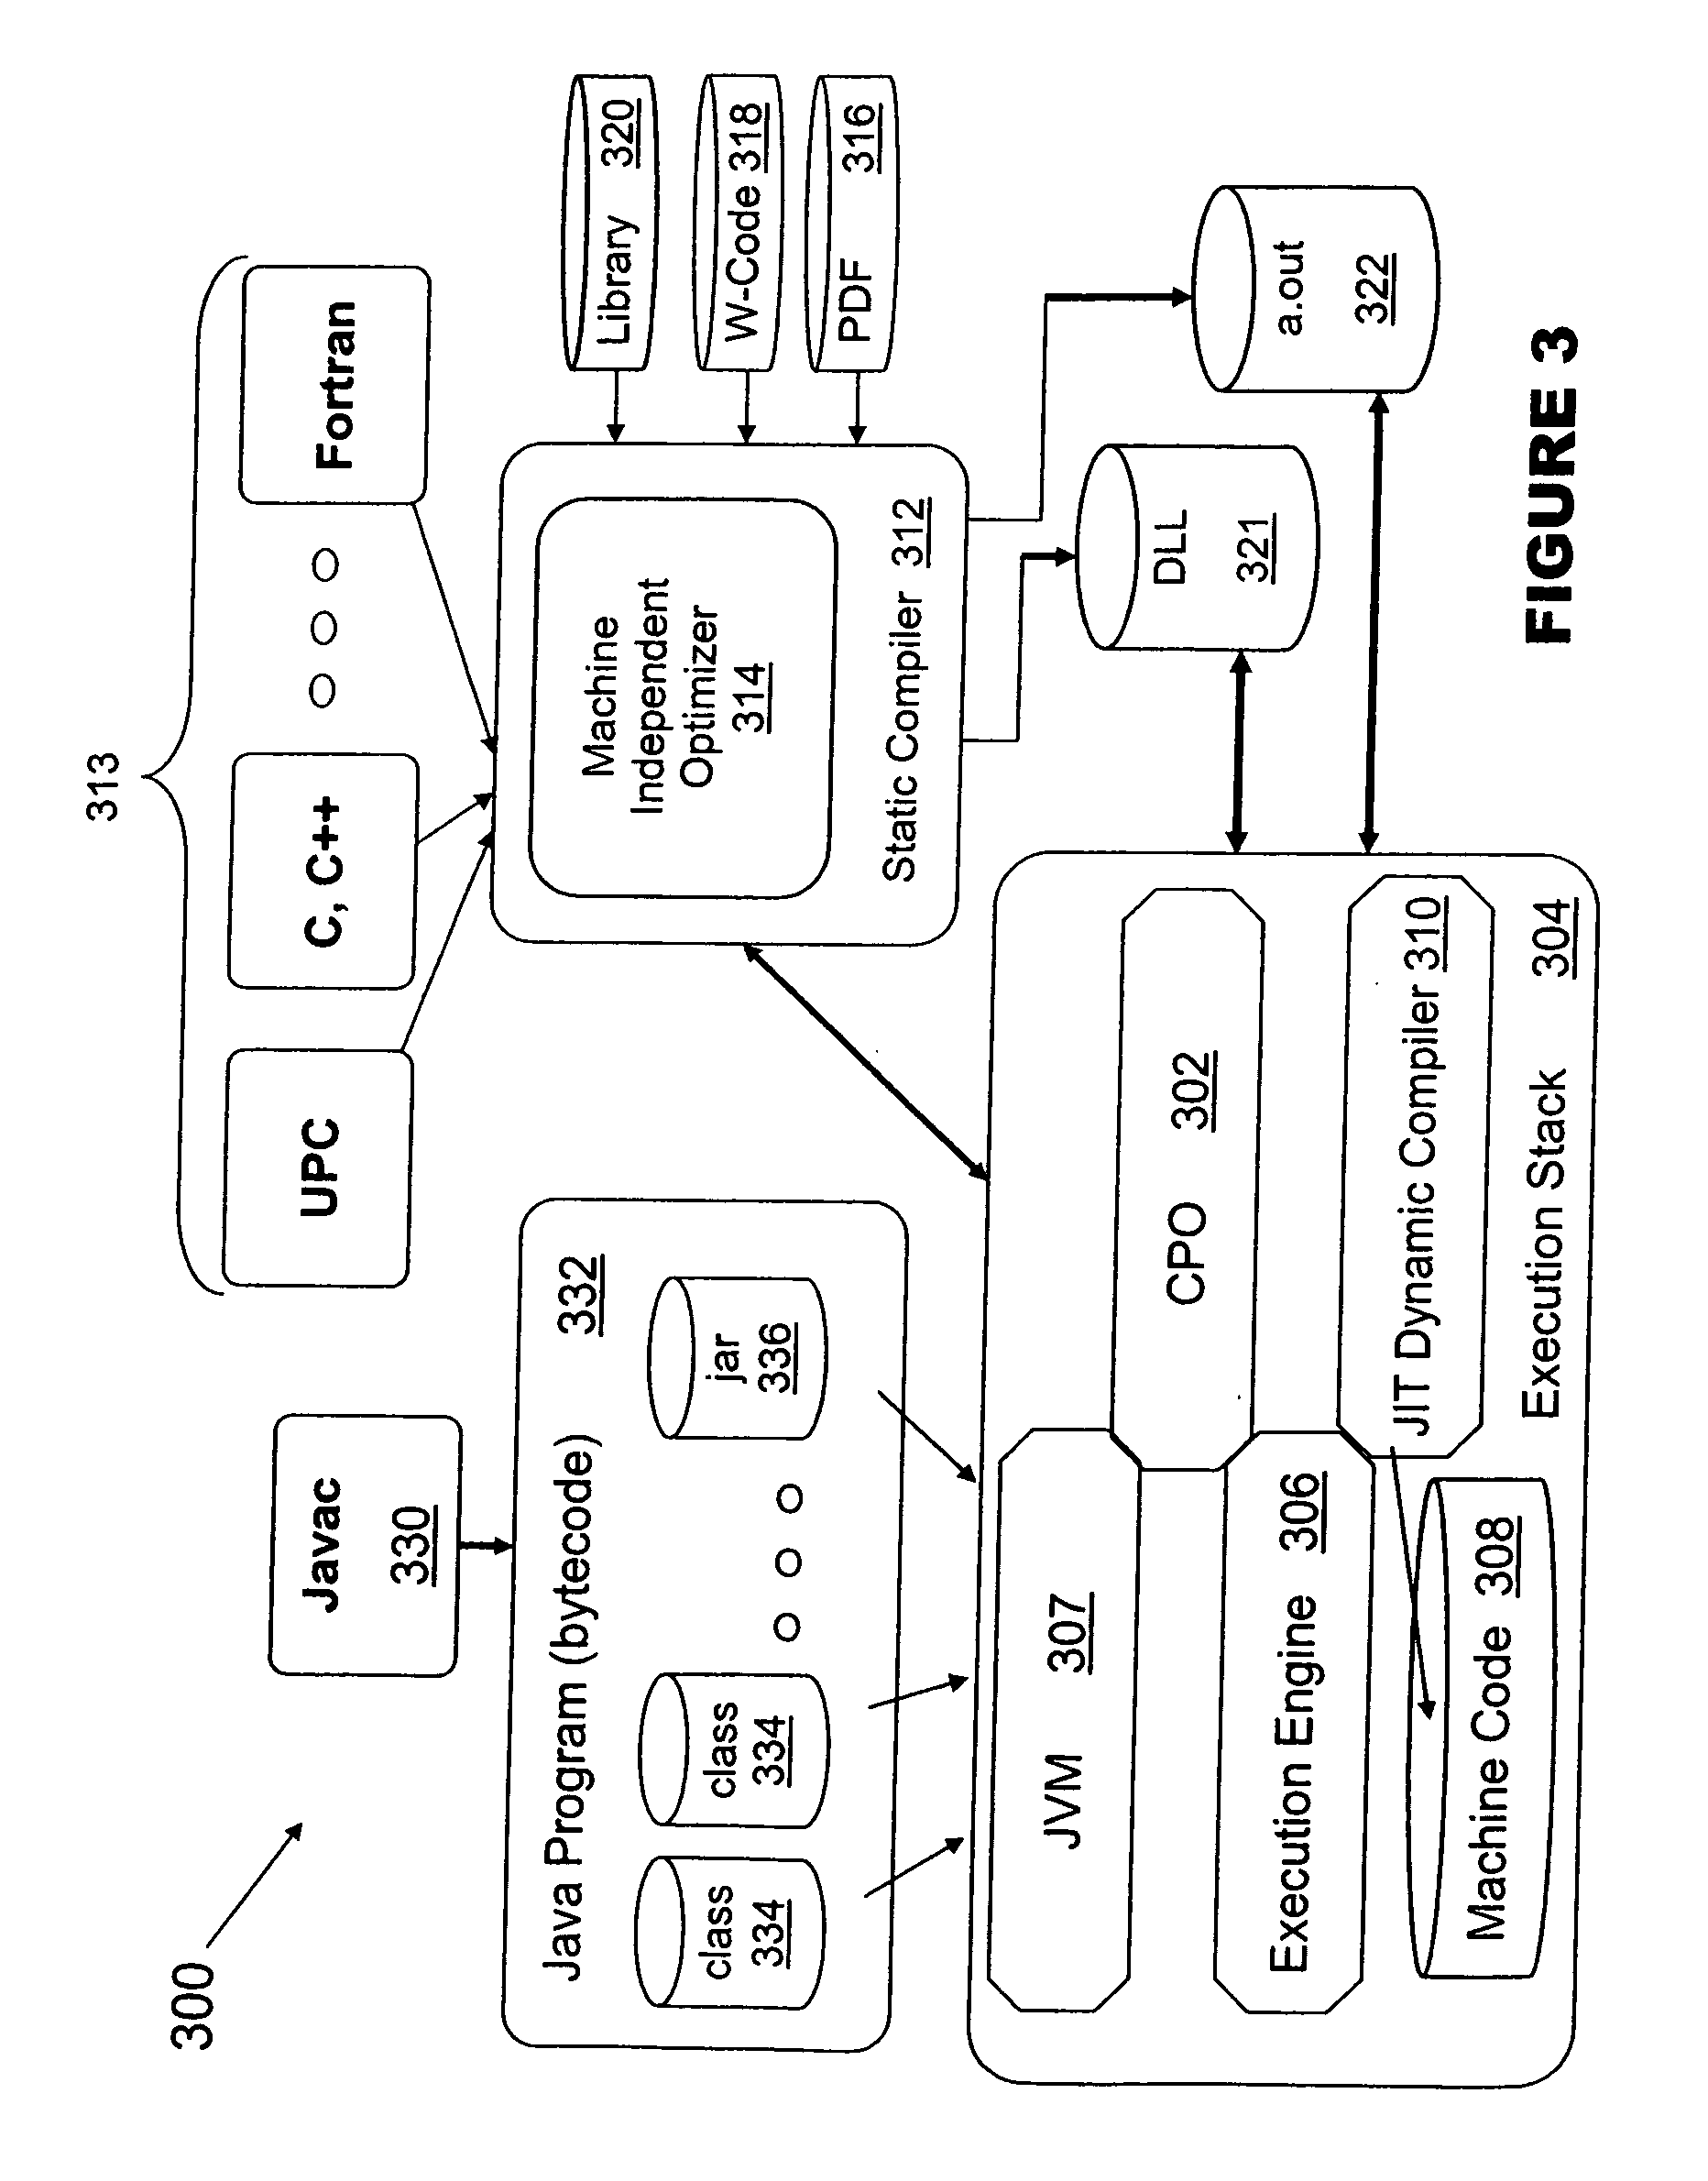 Method for improving performance of executable code